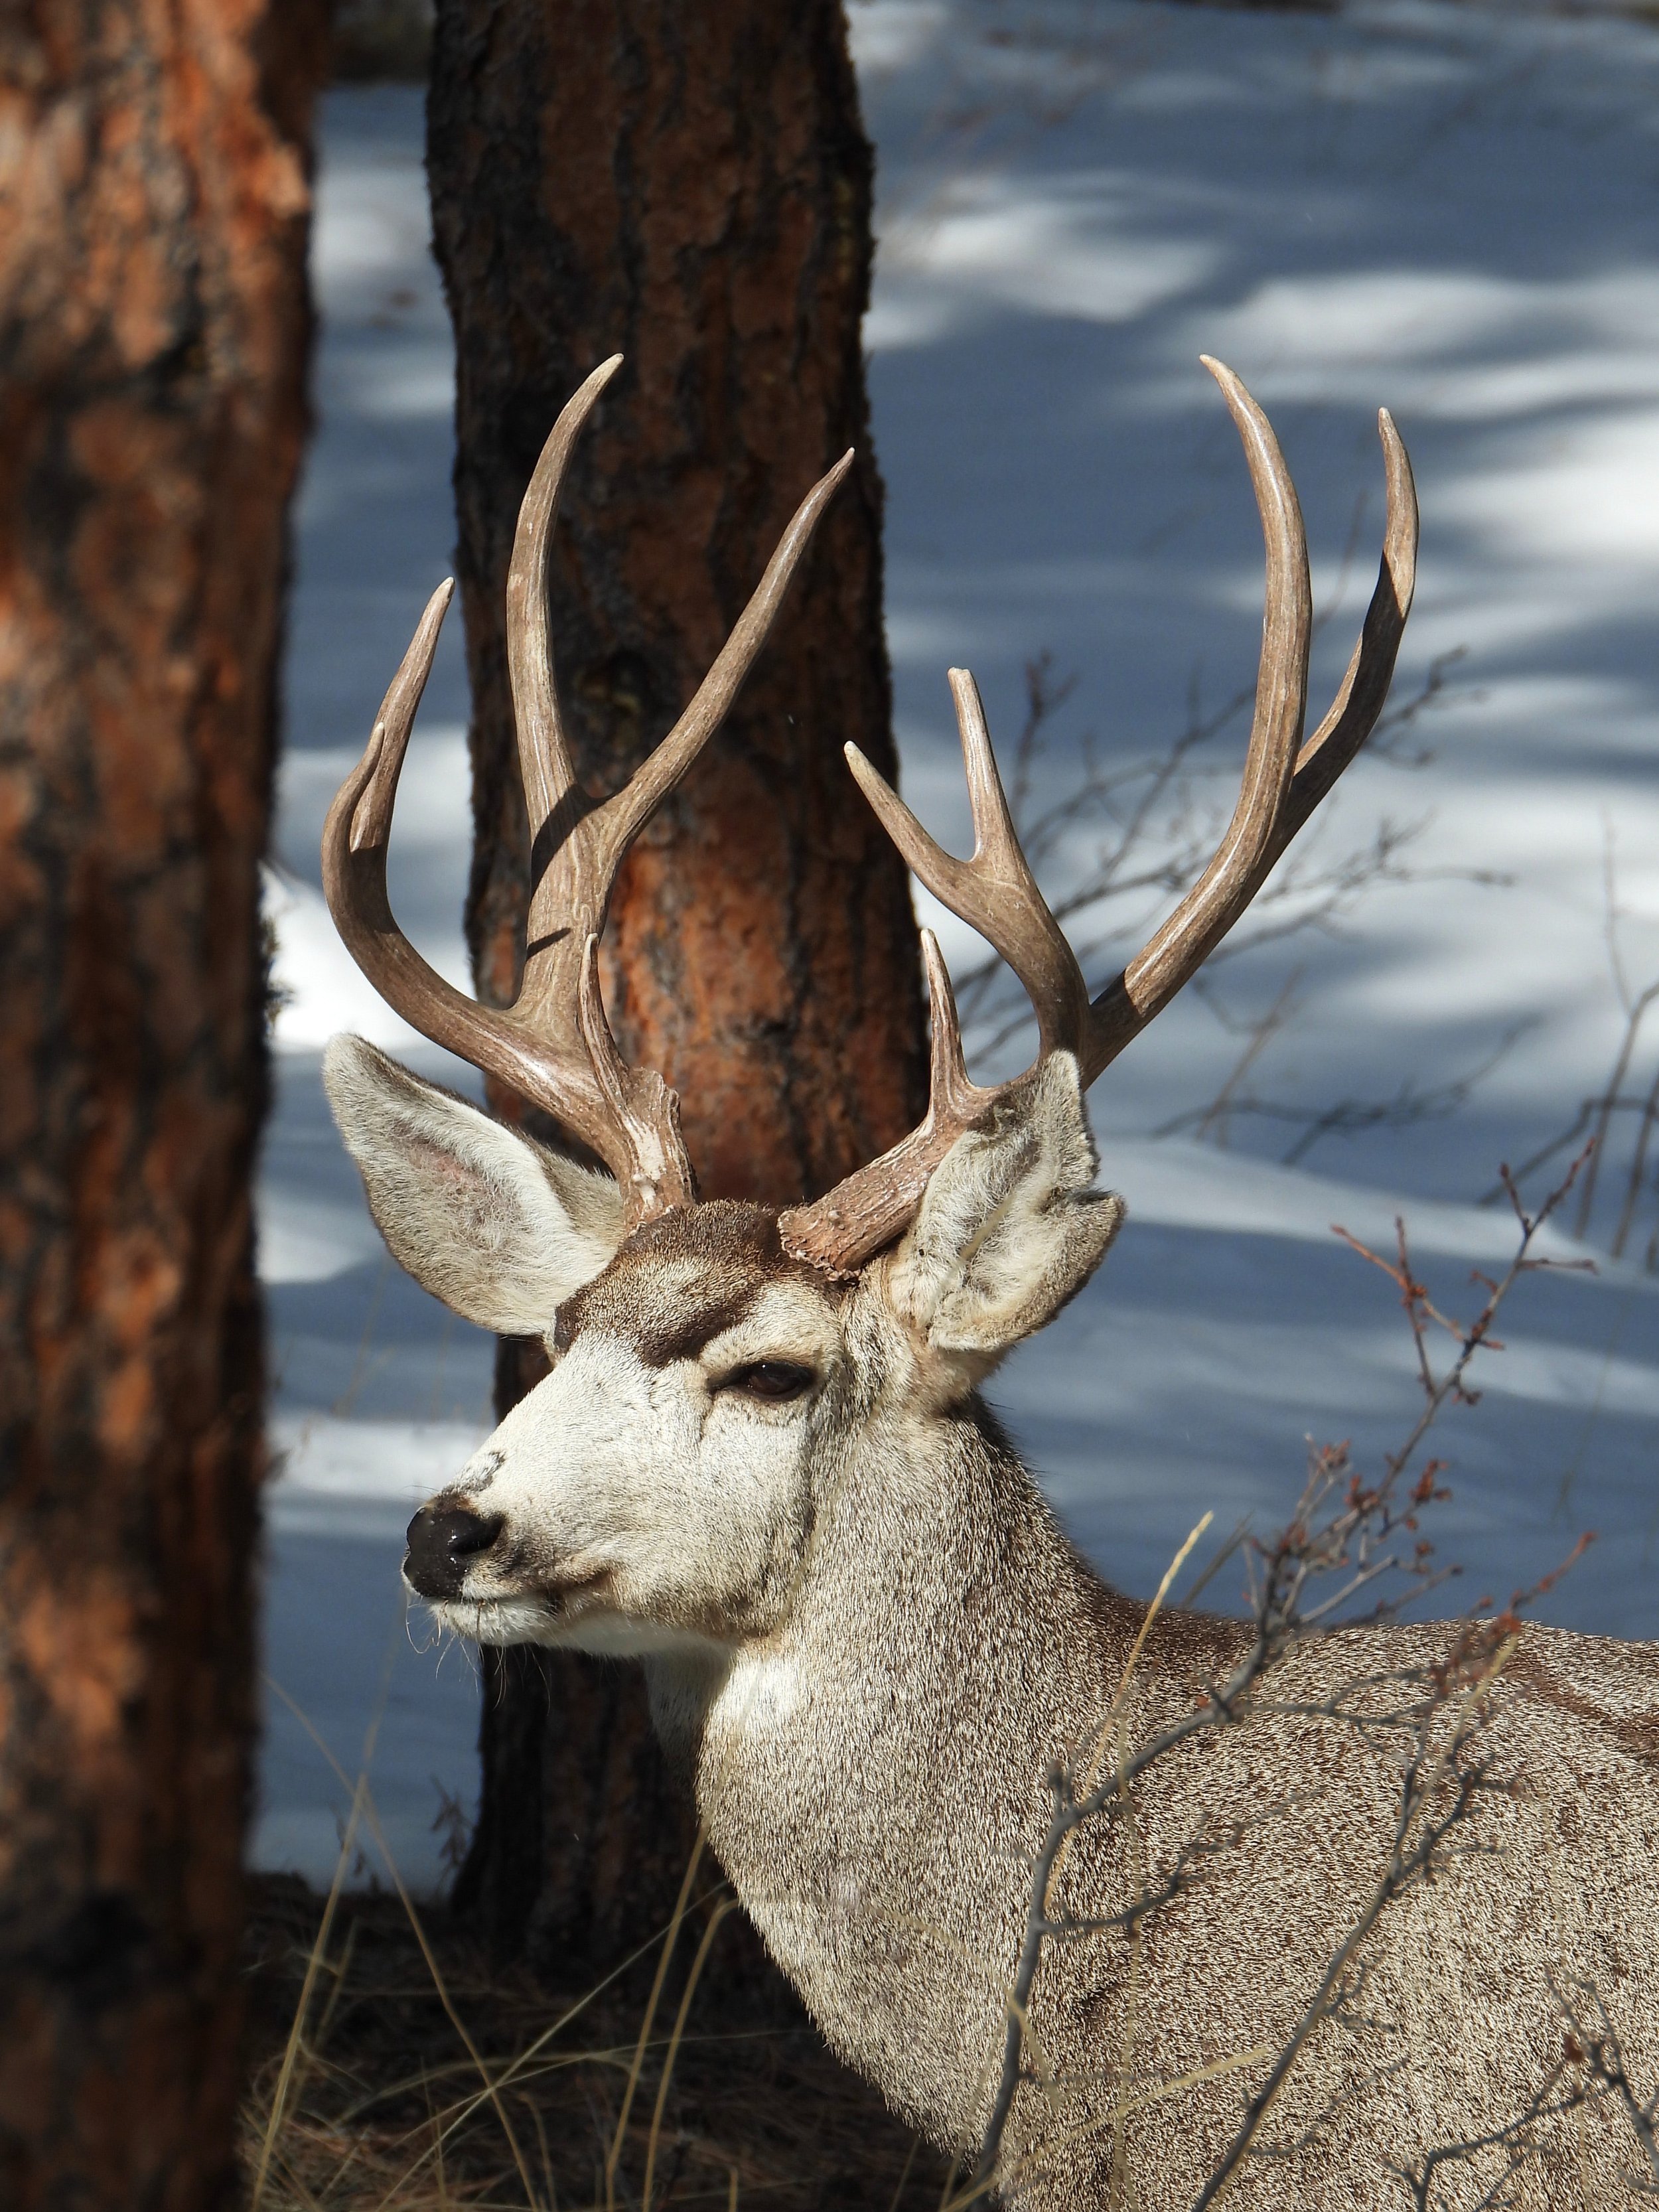 Infrastructure can protect Central Oregon's Mule Deer — Central Oregon ...